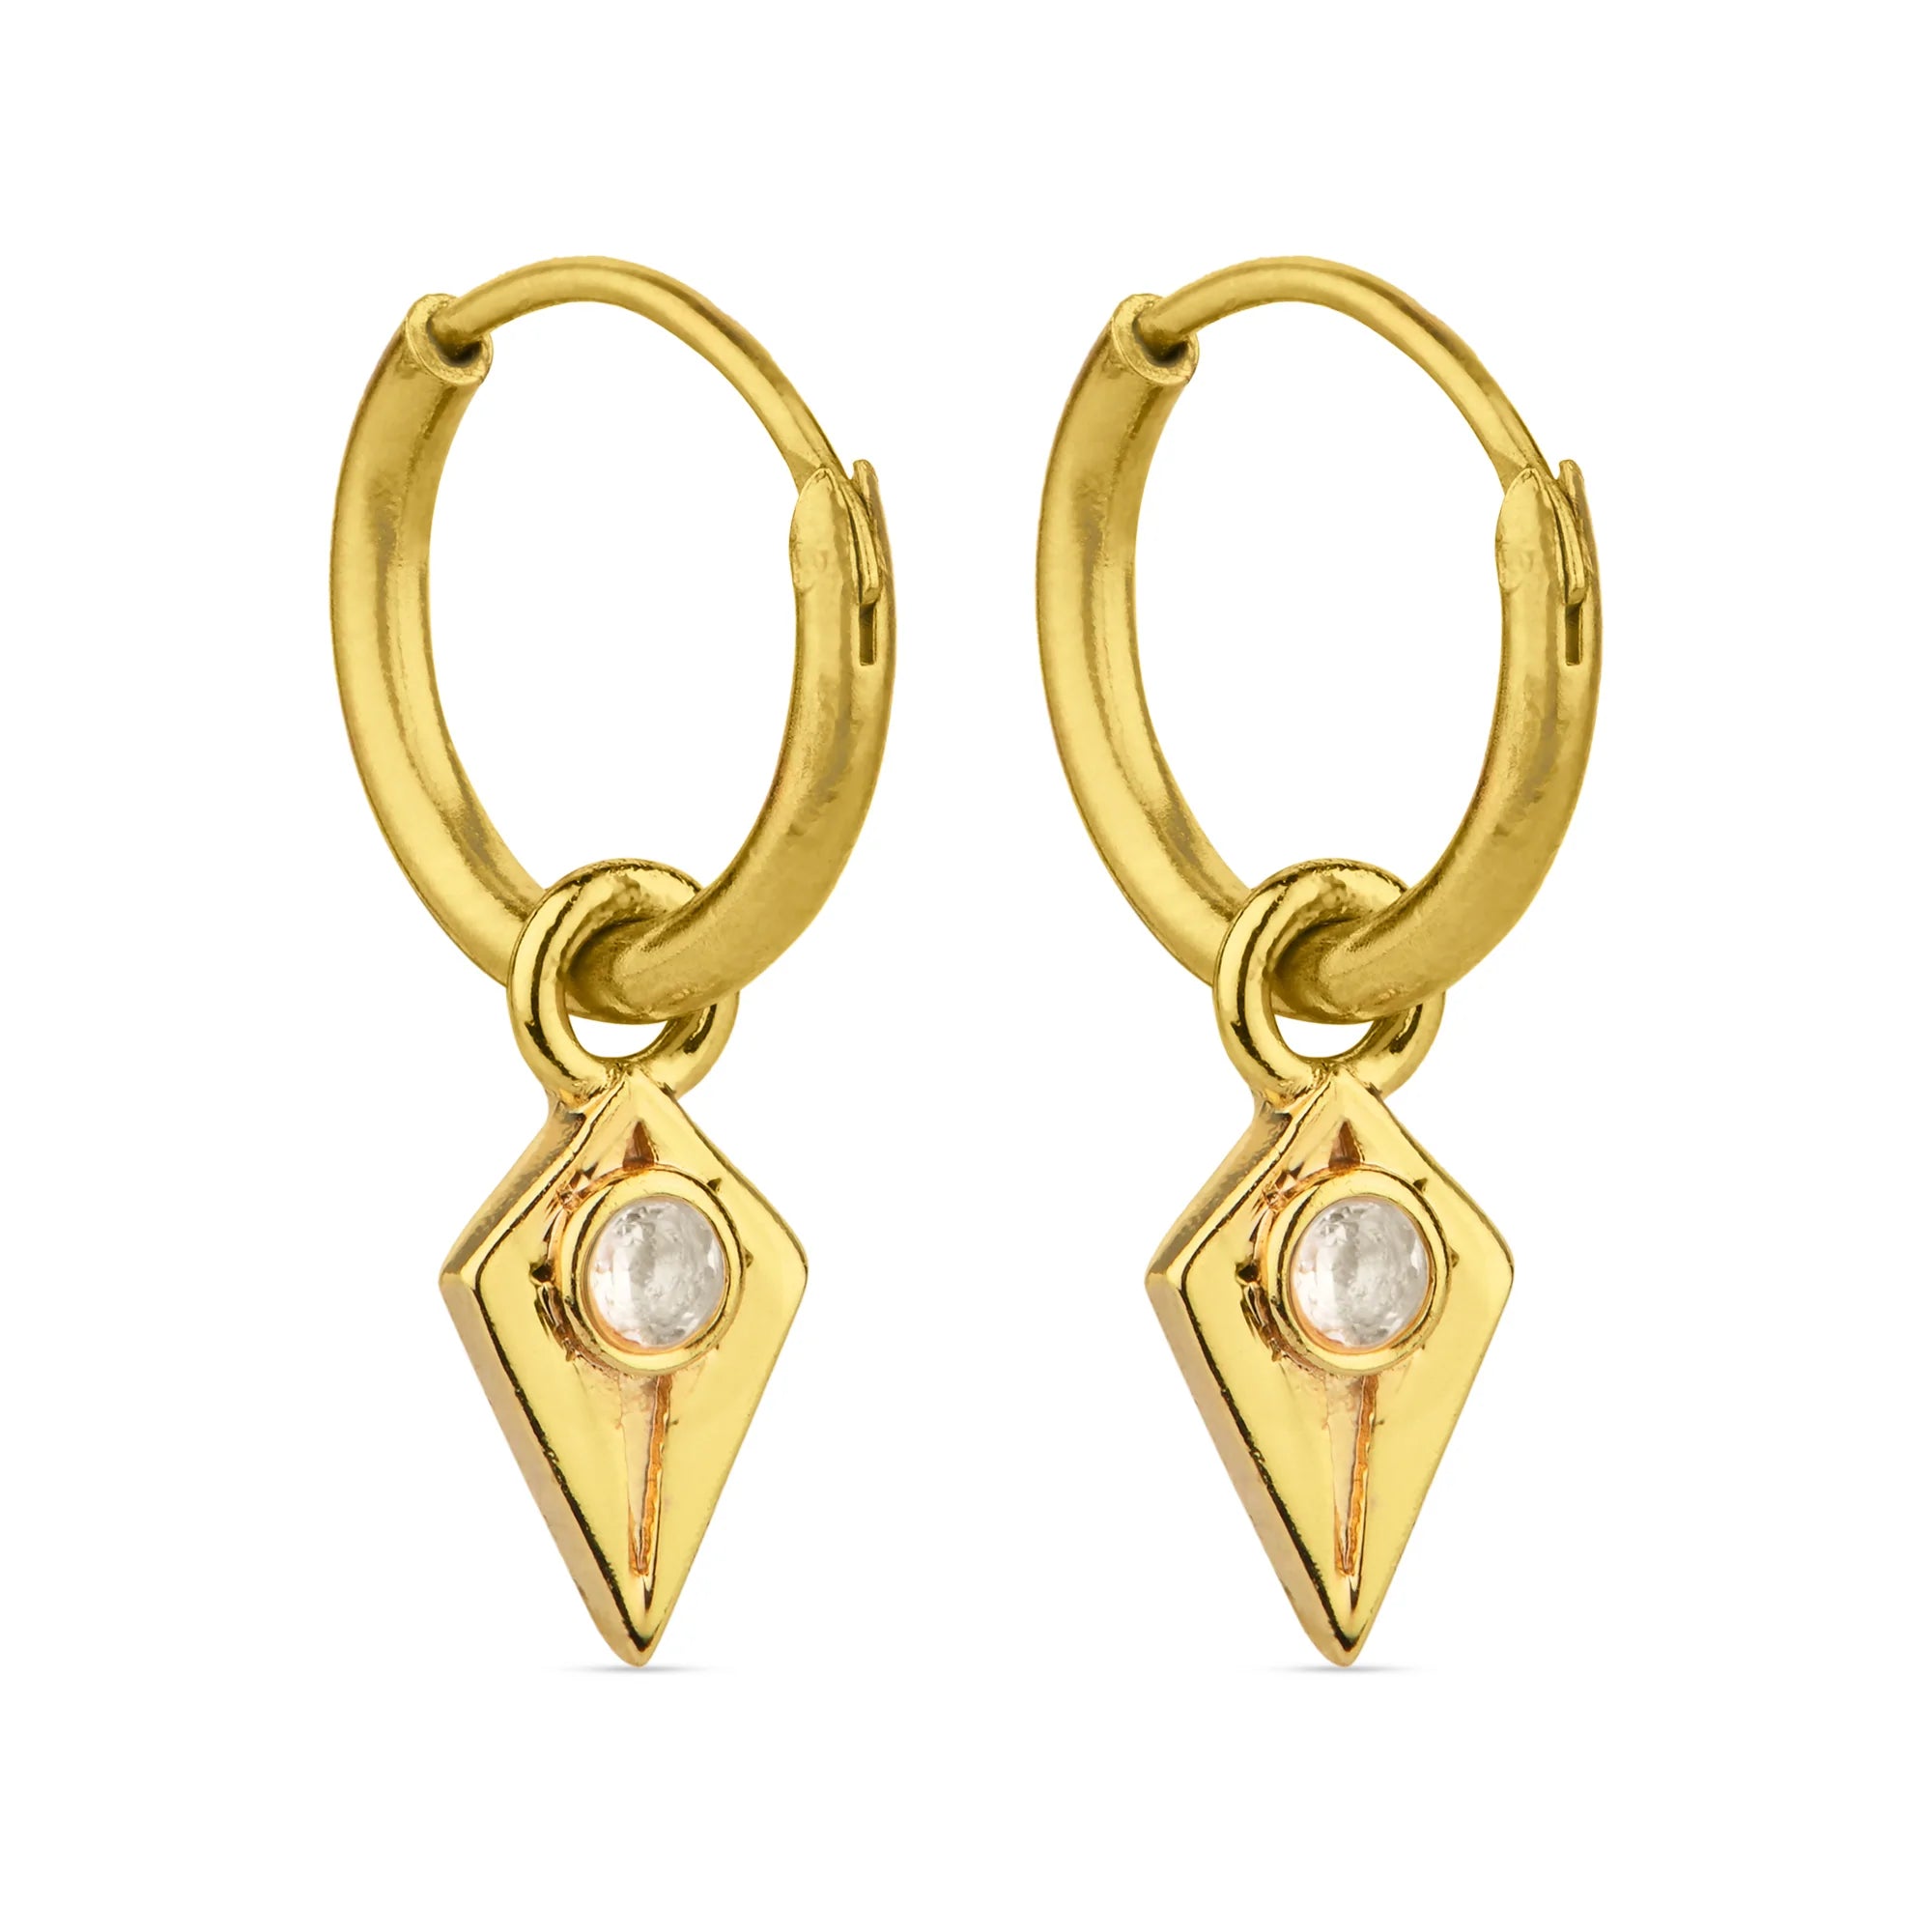 Real Gold Plated Z Crystal Triangle Hoops Earring For Women By Accessorize London